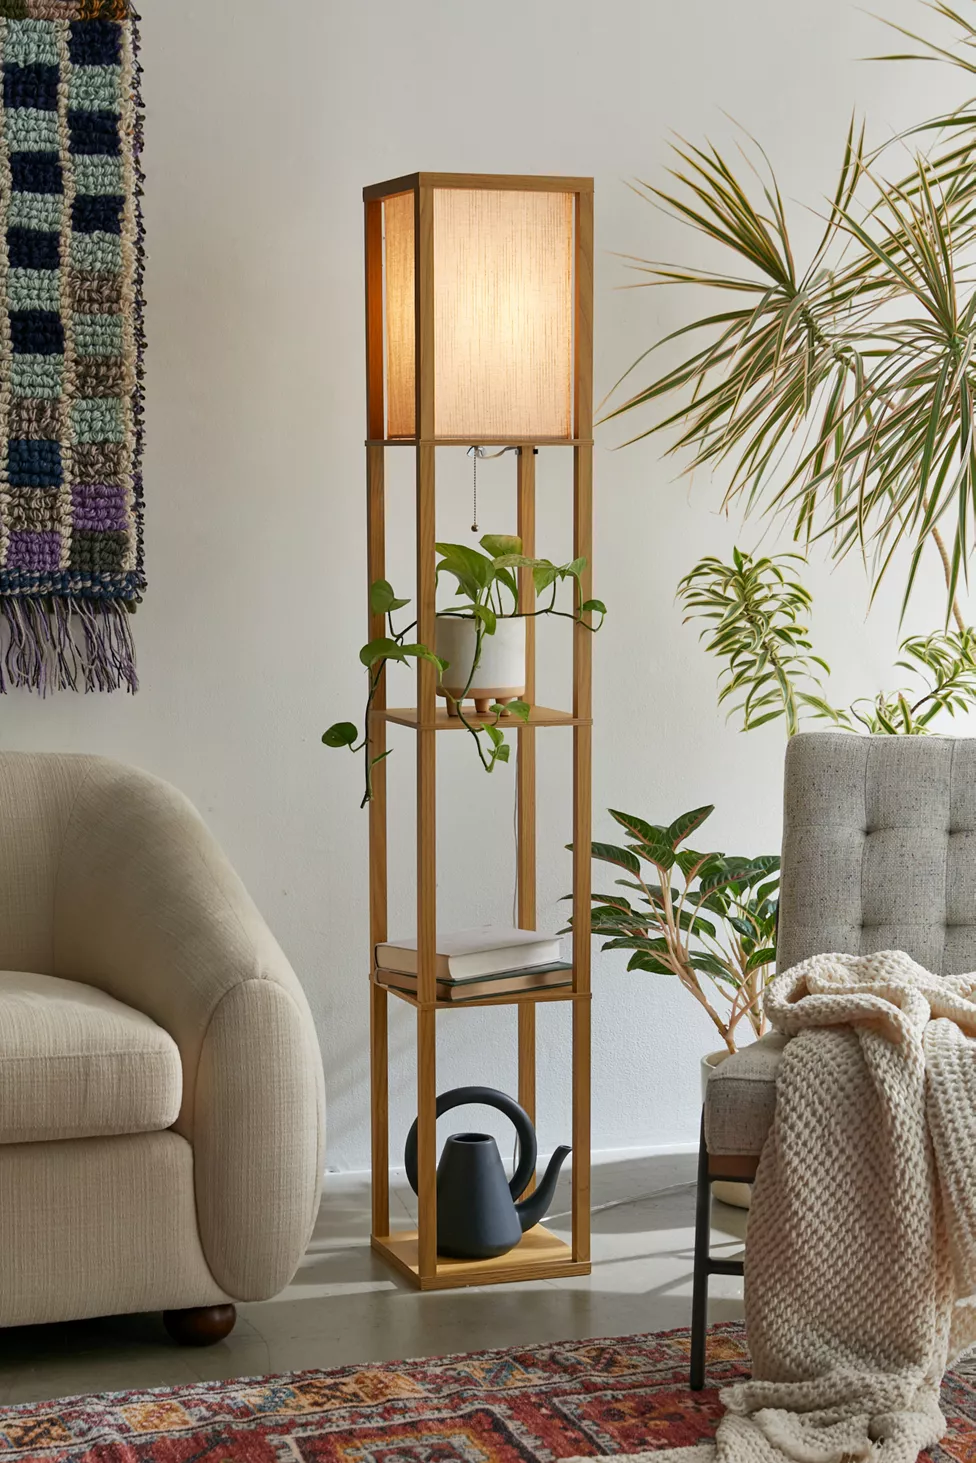 Place a Shelf Floor Lamp Between Accent Chairs